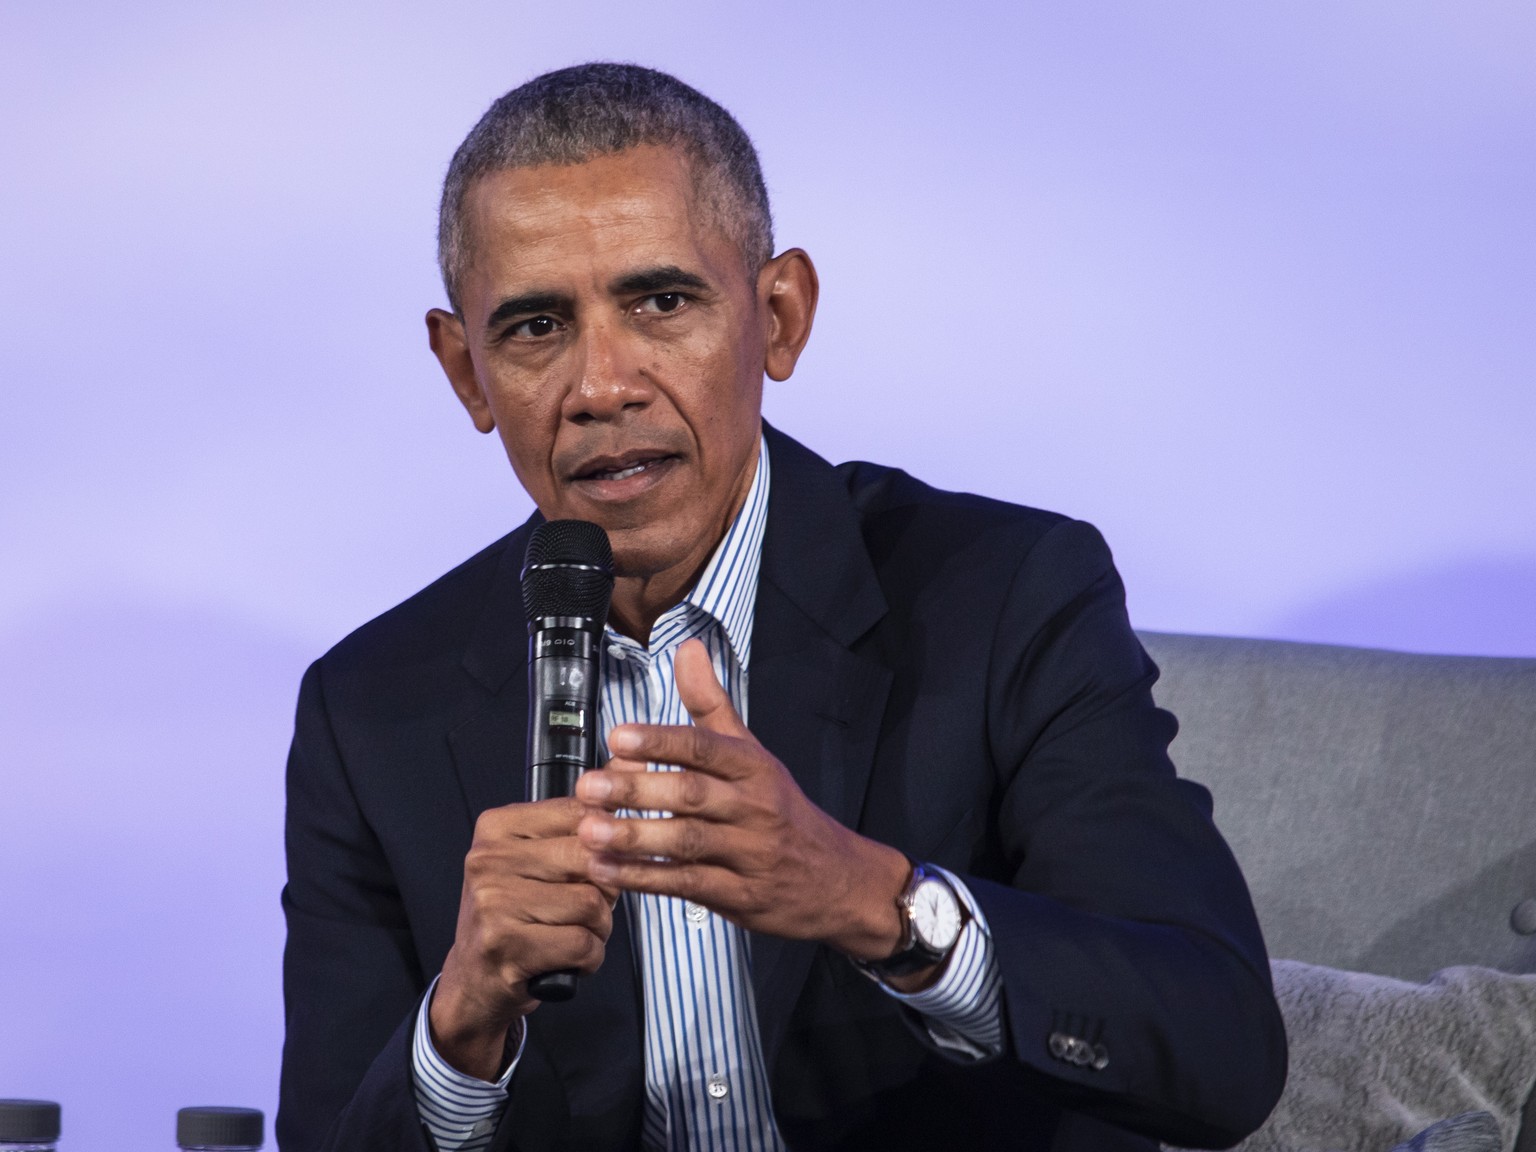 Former President Barack Obama speaks during the Obama Foundation Summit at the Illinois Institute of Technology in Chicago, Tuesday, Oct. 29, 2019. (Ashlee Rezin Garcia/Chicago Sun-Times via AP)